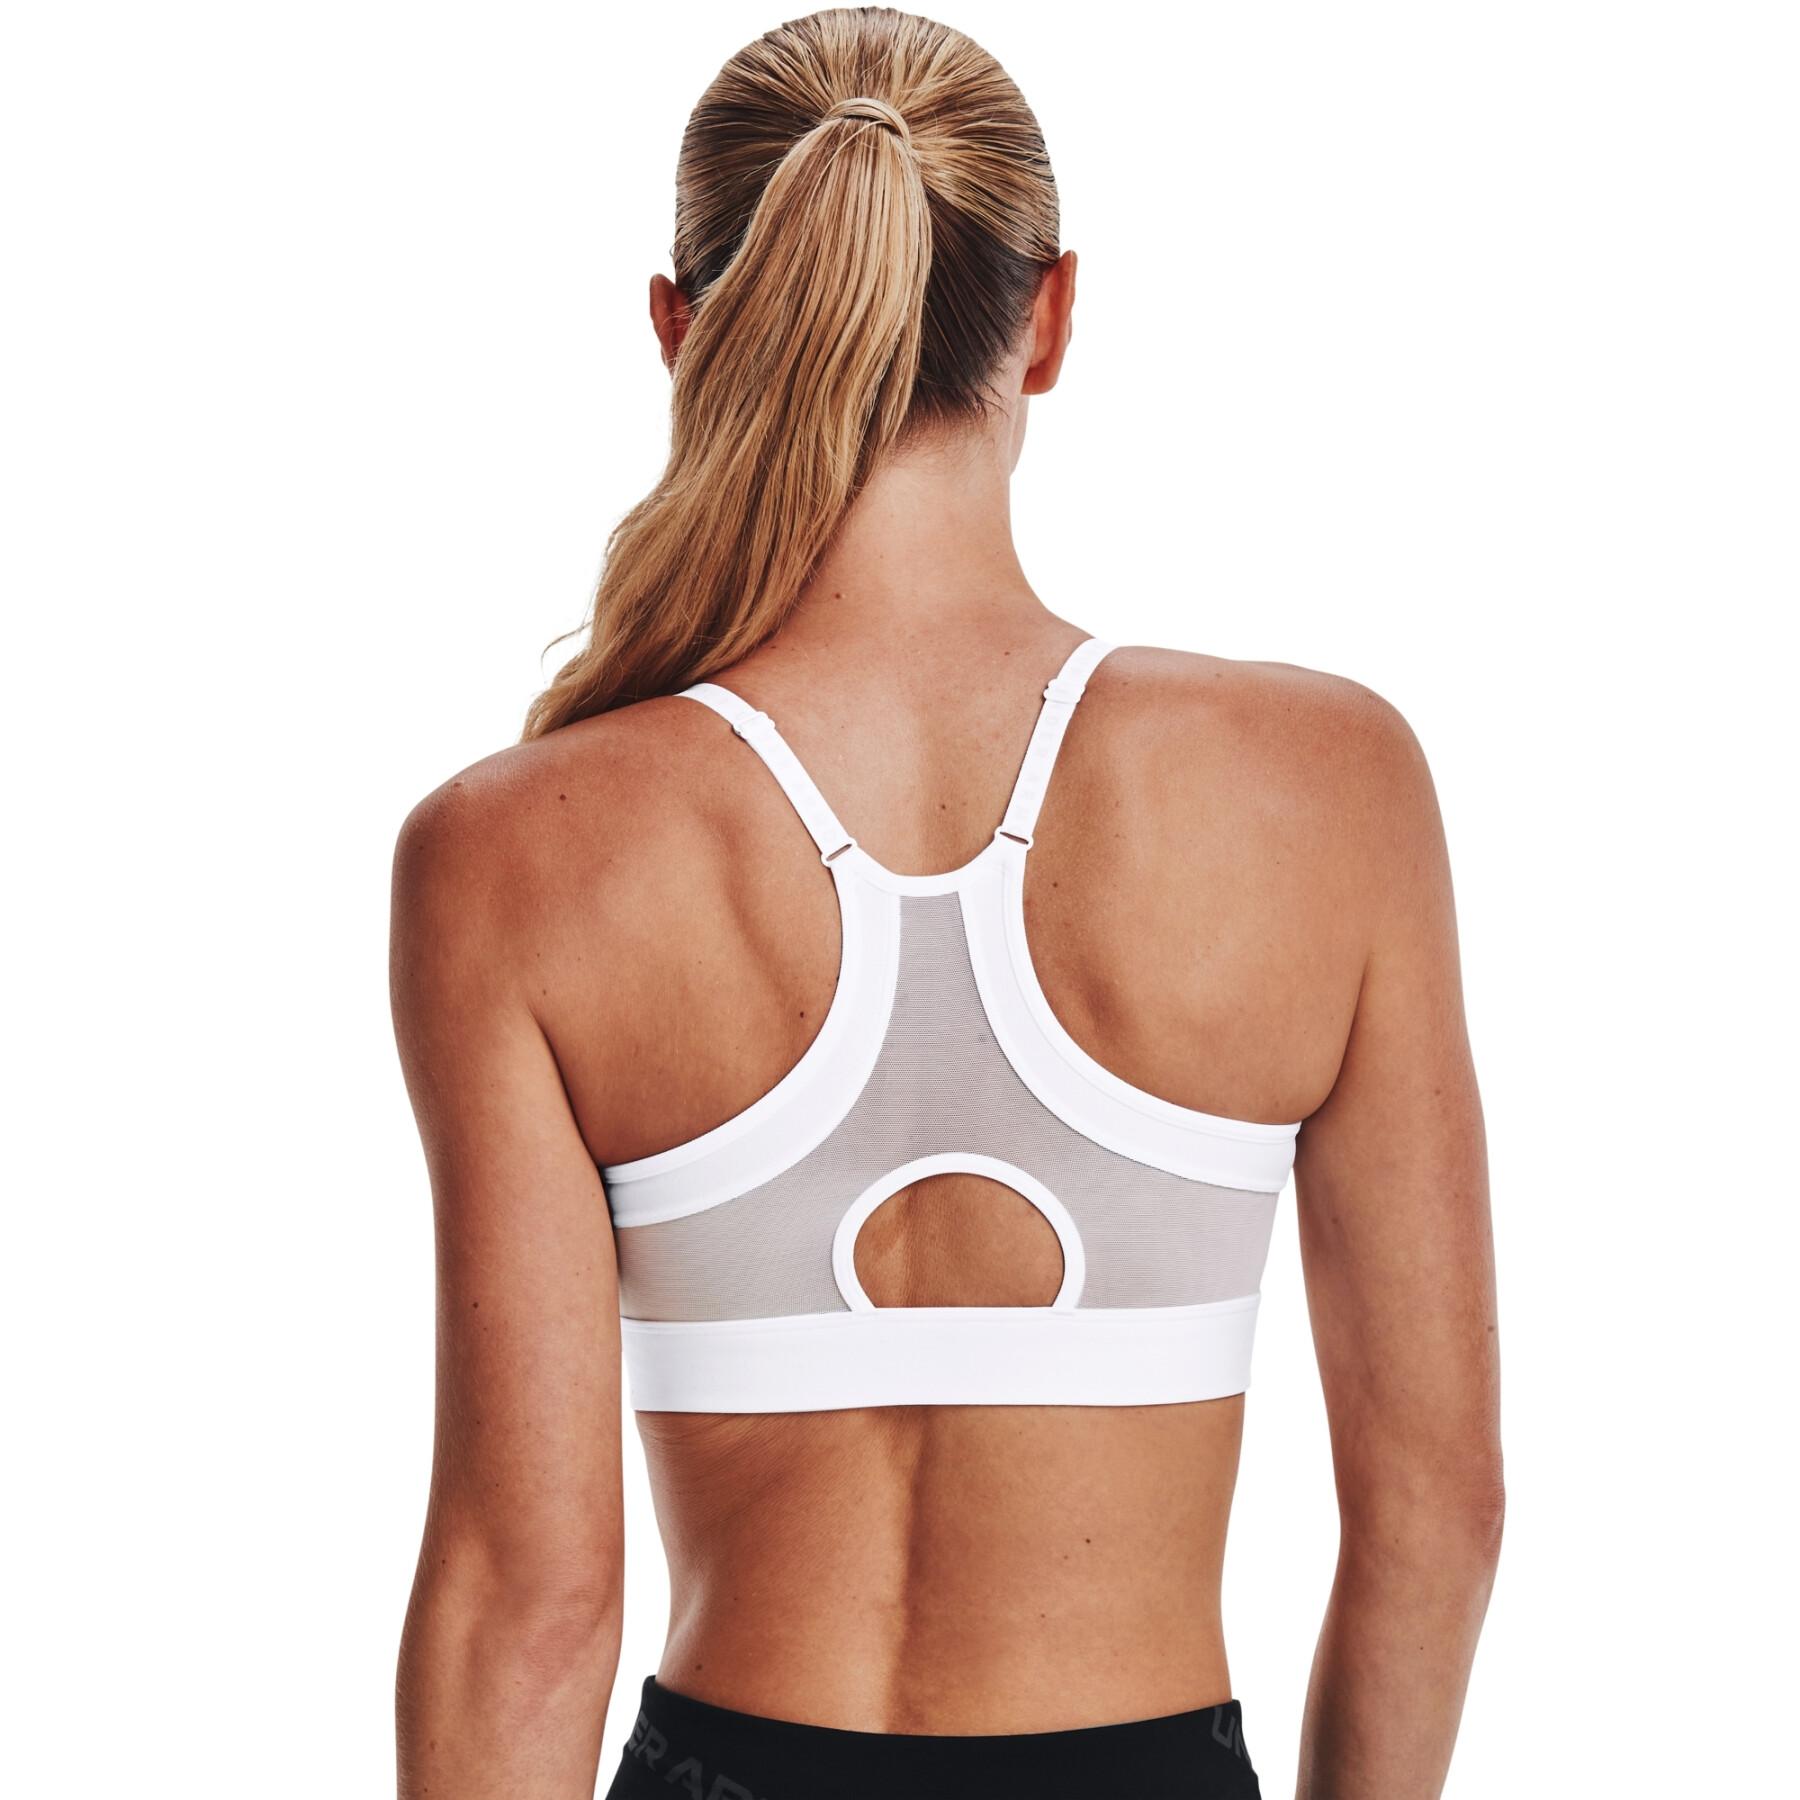 Women's light support sports bra Under Armour Infinity covered